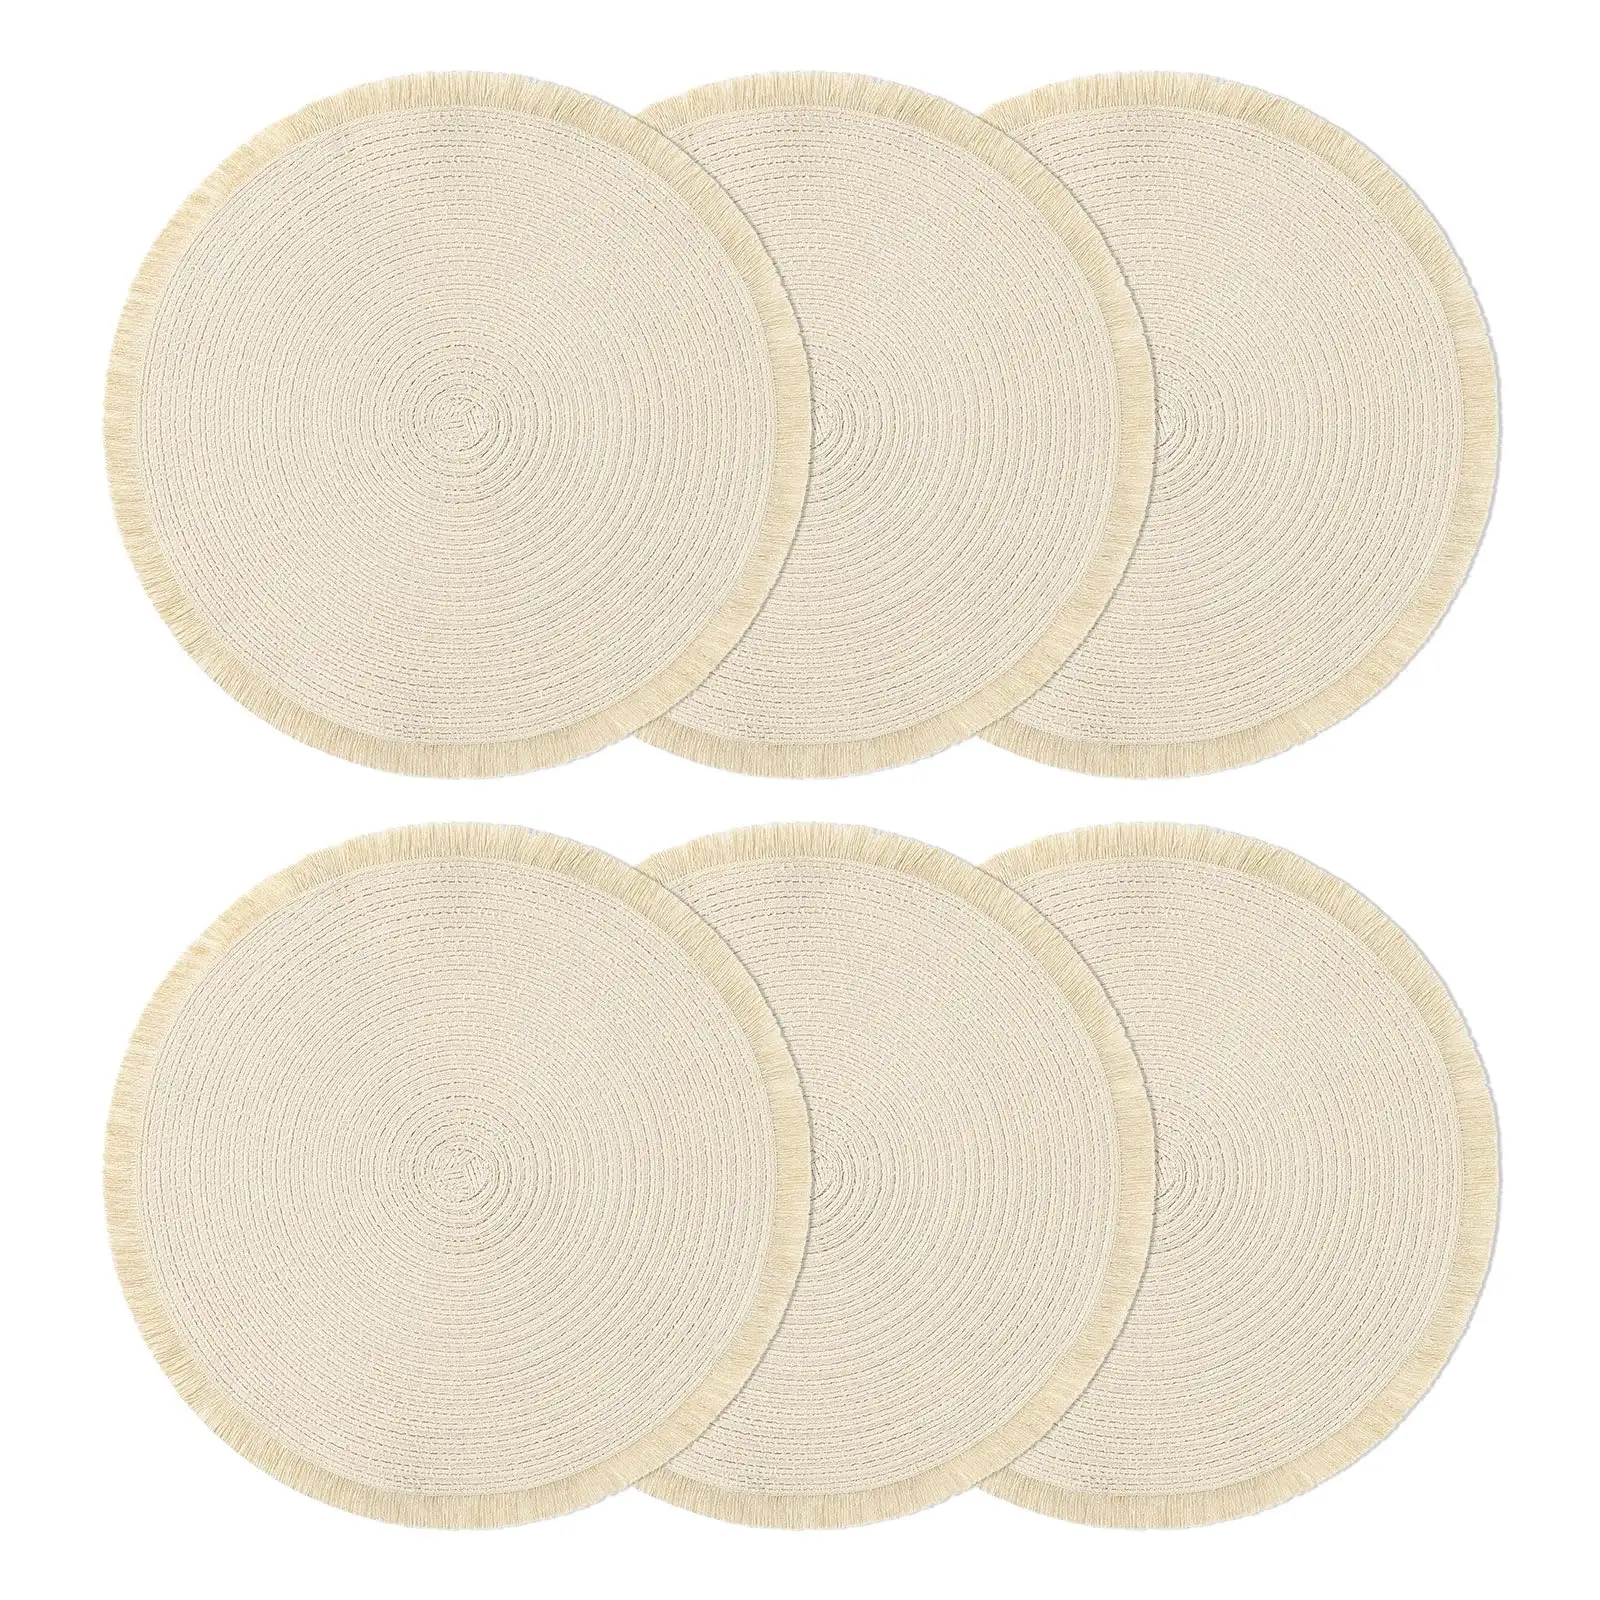 Round Placemats Beige Table Mats For Dining Table Washable Braided Place Mats With Fringe For Home Wedding Party Decor